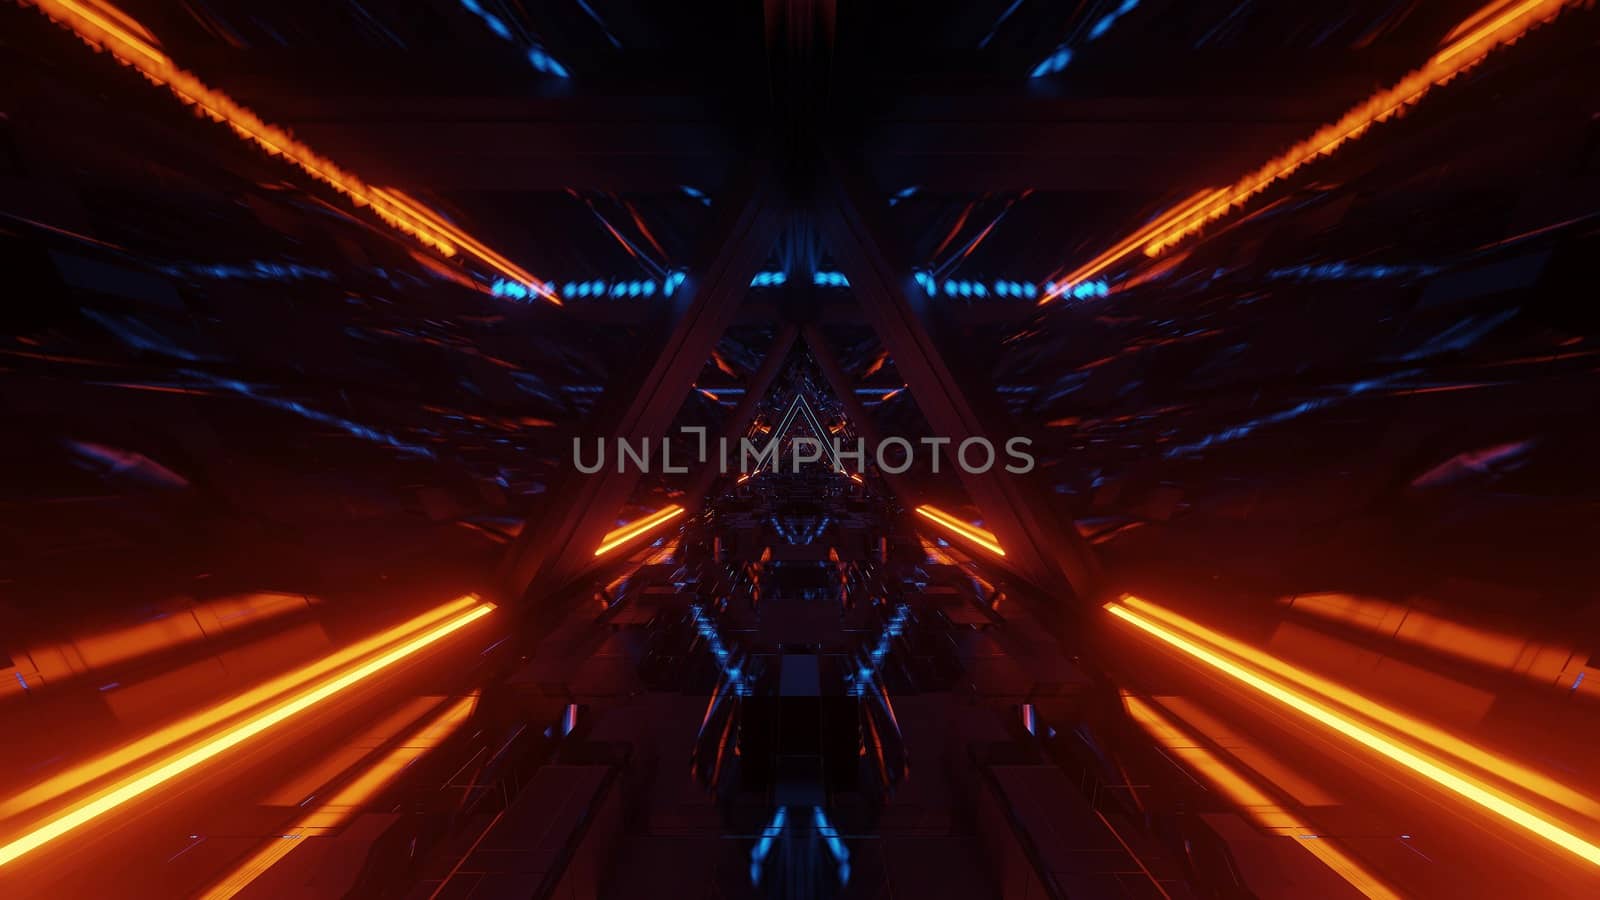 technical triangle space ship hangar tunnel corridor with glass windows 3d illustrations graphics artworks background wallpaper, futuristic sci-fi space tunnel 3d rendering design